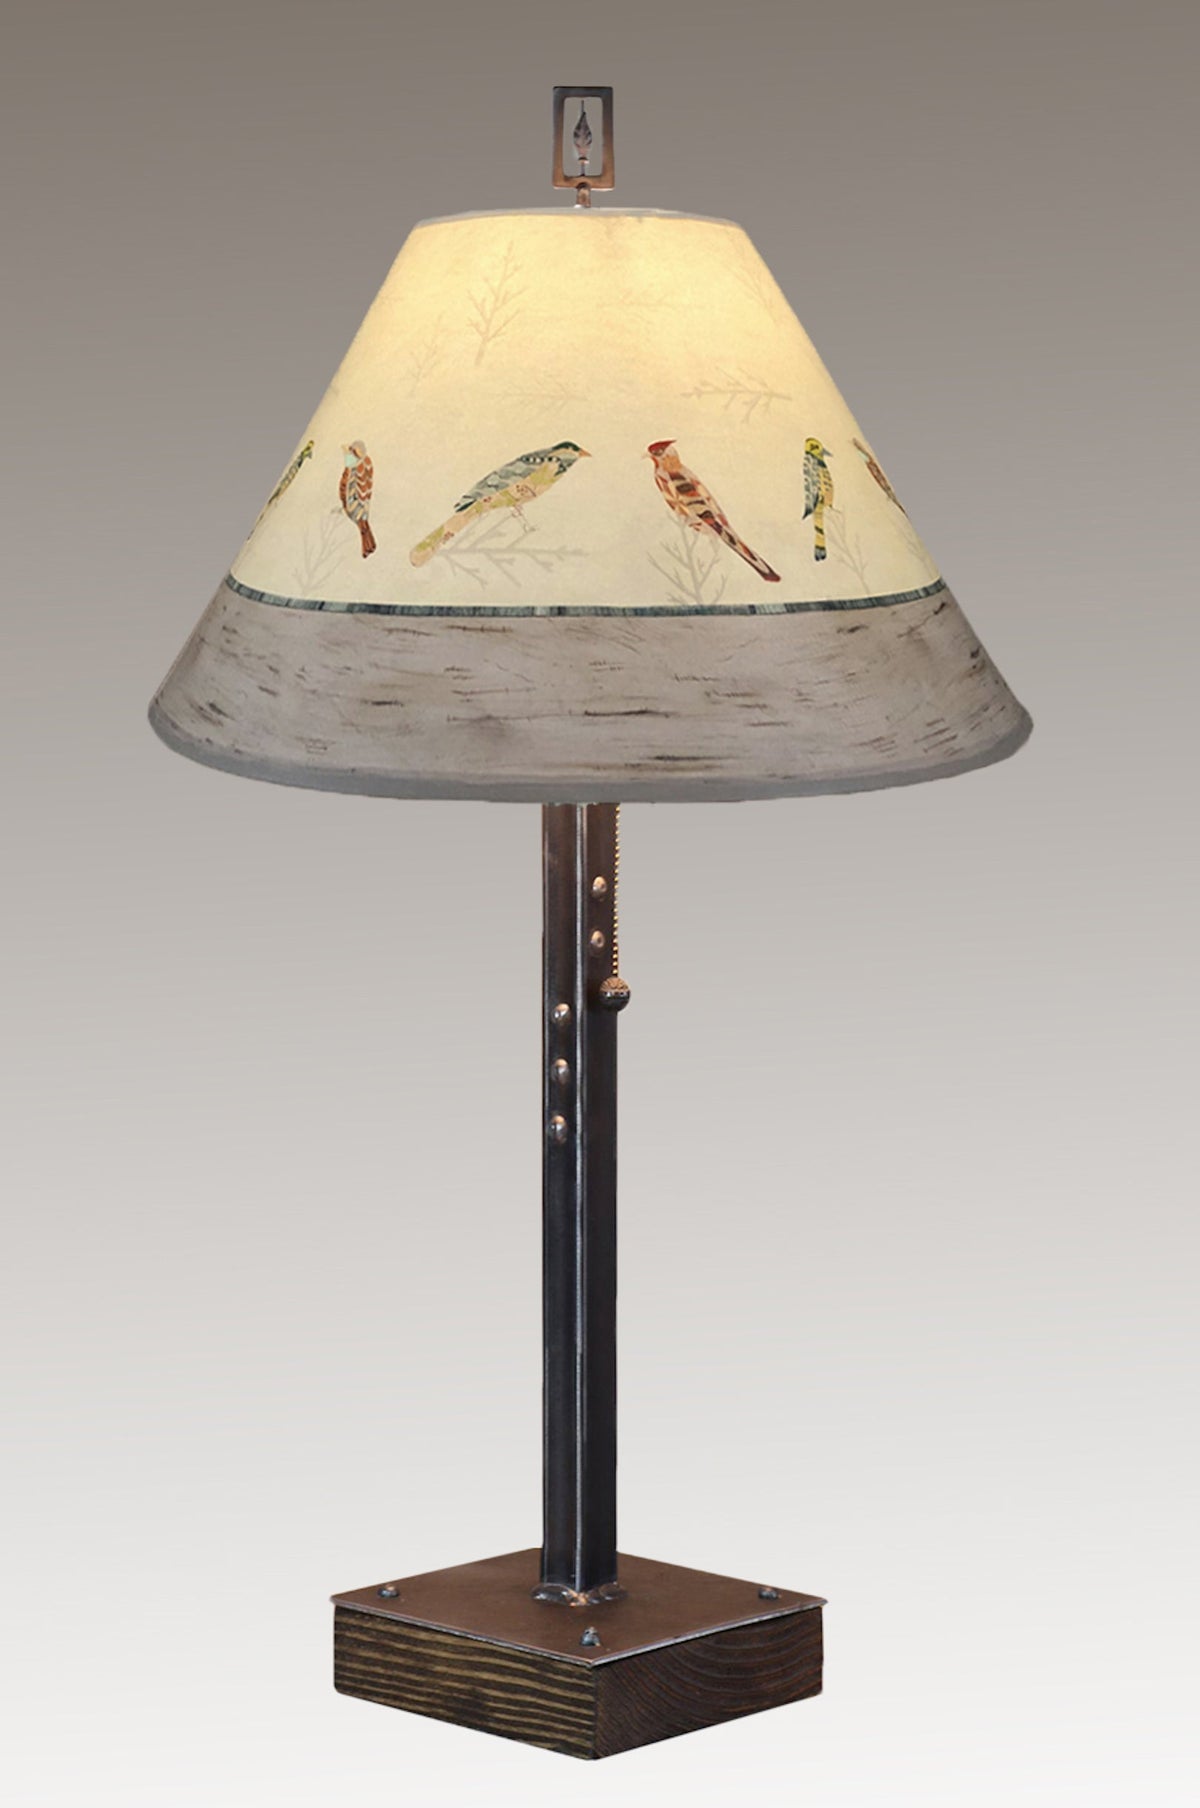 Janna Ugone &amp; Co Table Lamps Steel Table Lamp on Wood with Medium Conical Shade in Bird Friends